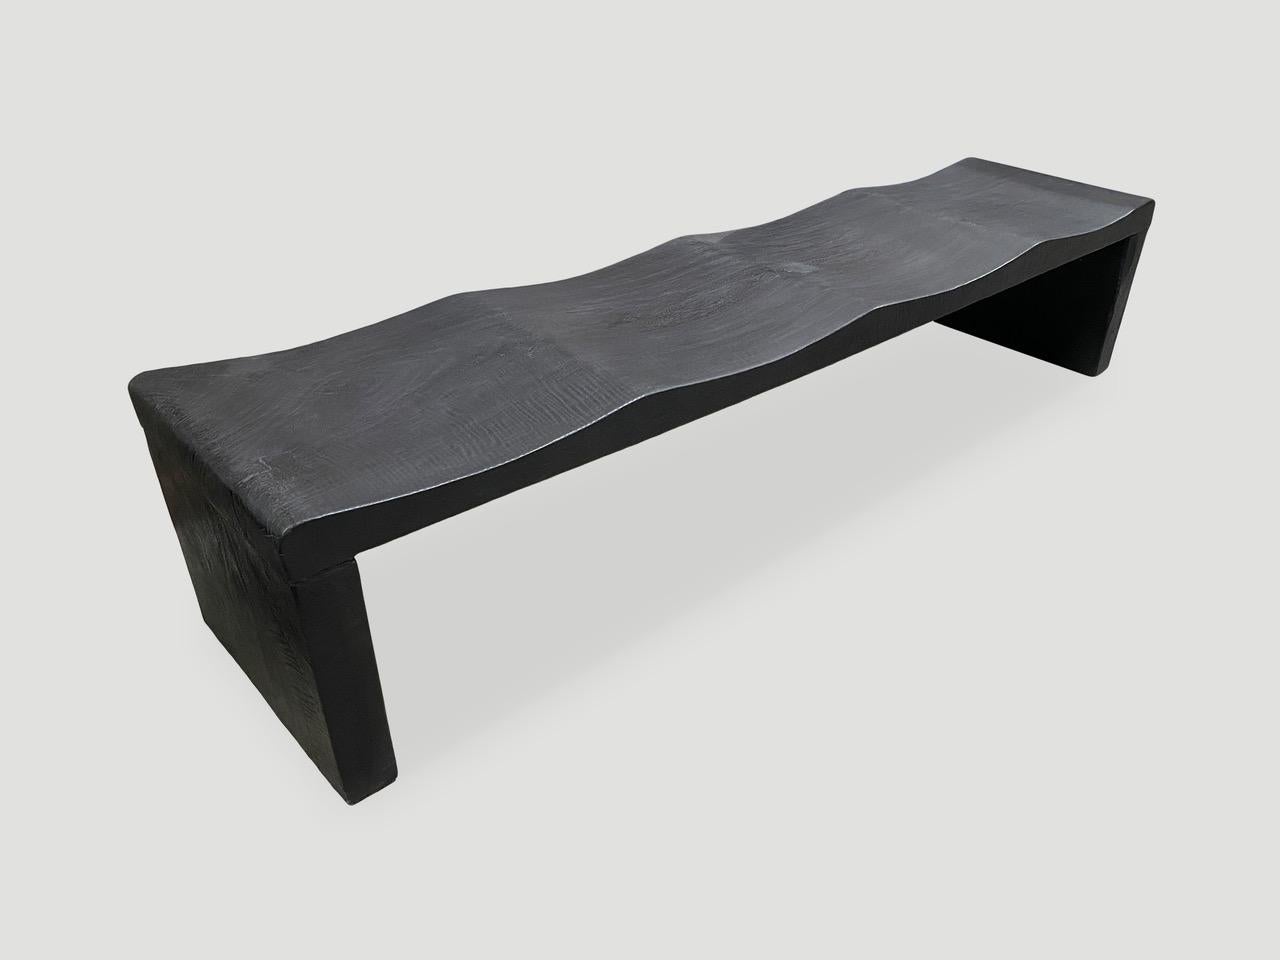 The wave bench represents a sleek, modern aesthetic, designed to provide comfort and durability. Solid reclaimed mango wood is hand carved from a single thick slab into a wave design with added butterfly detail. Burnt, sanded and sealed revealing